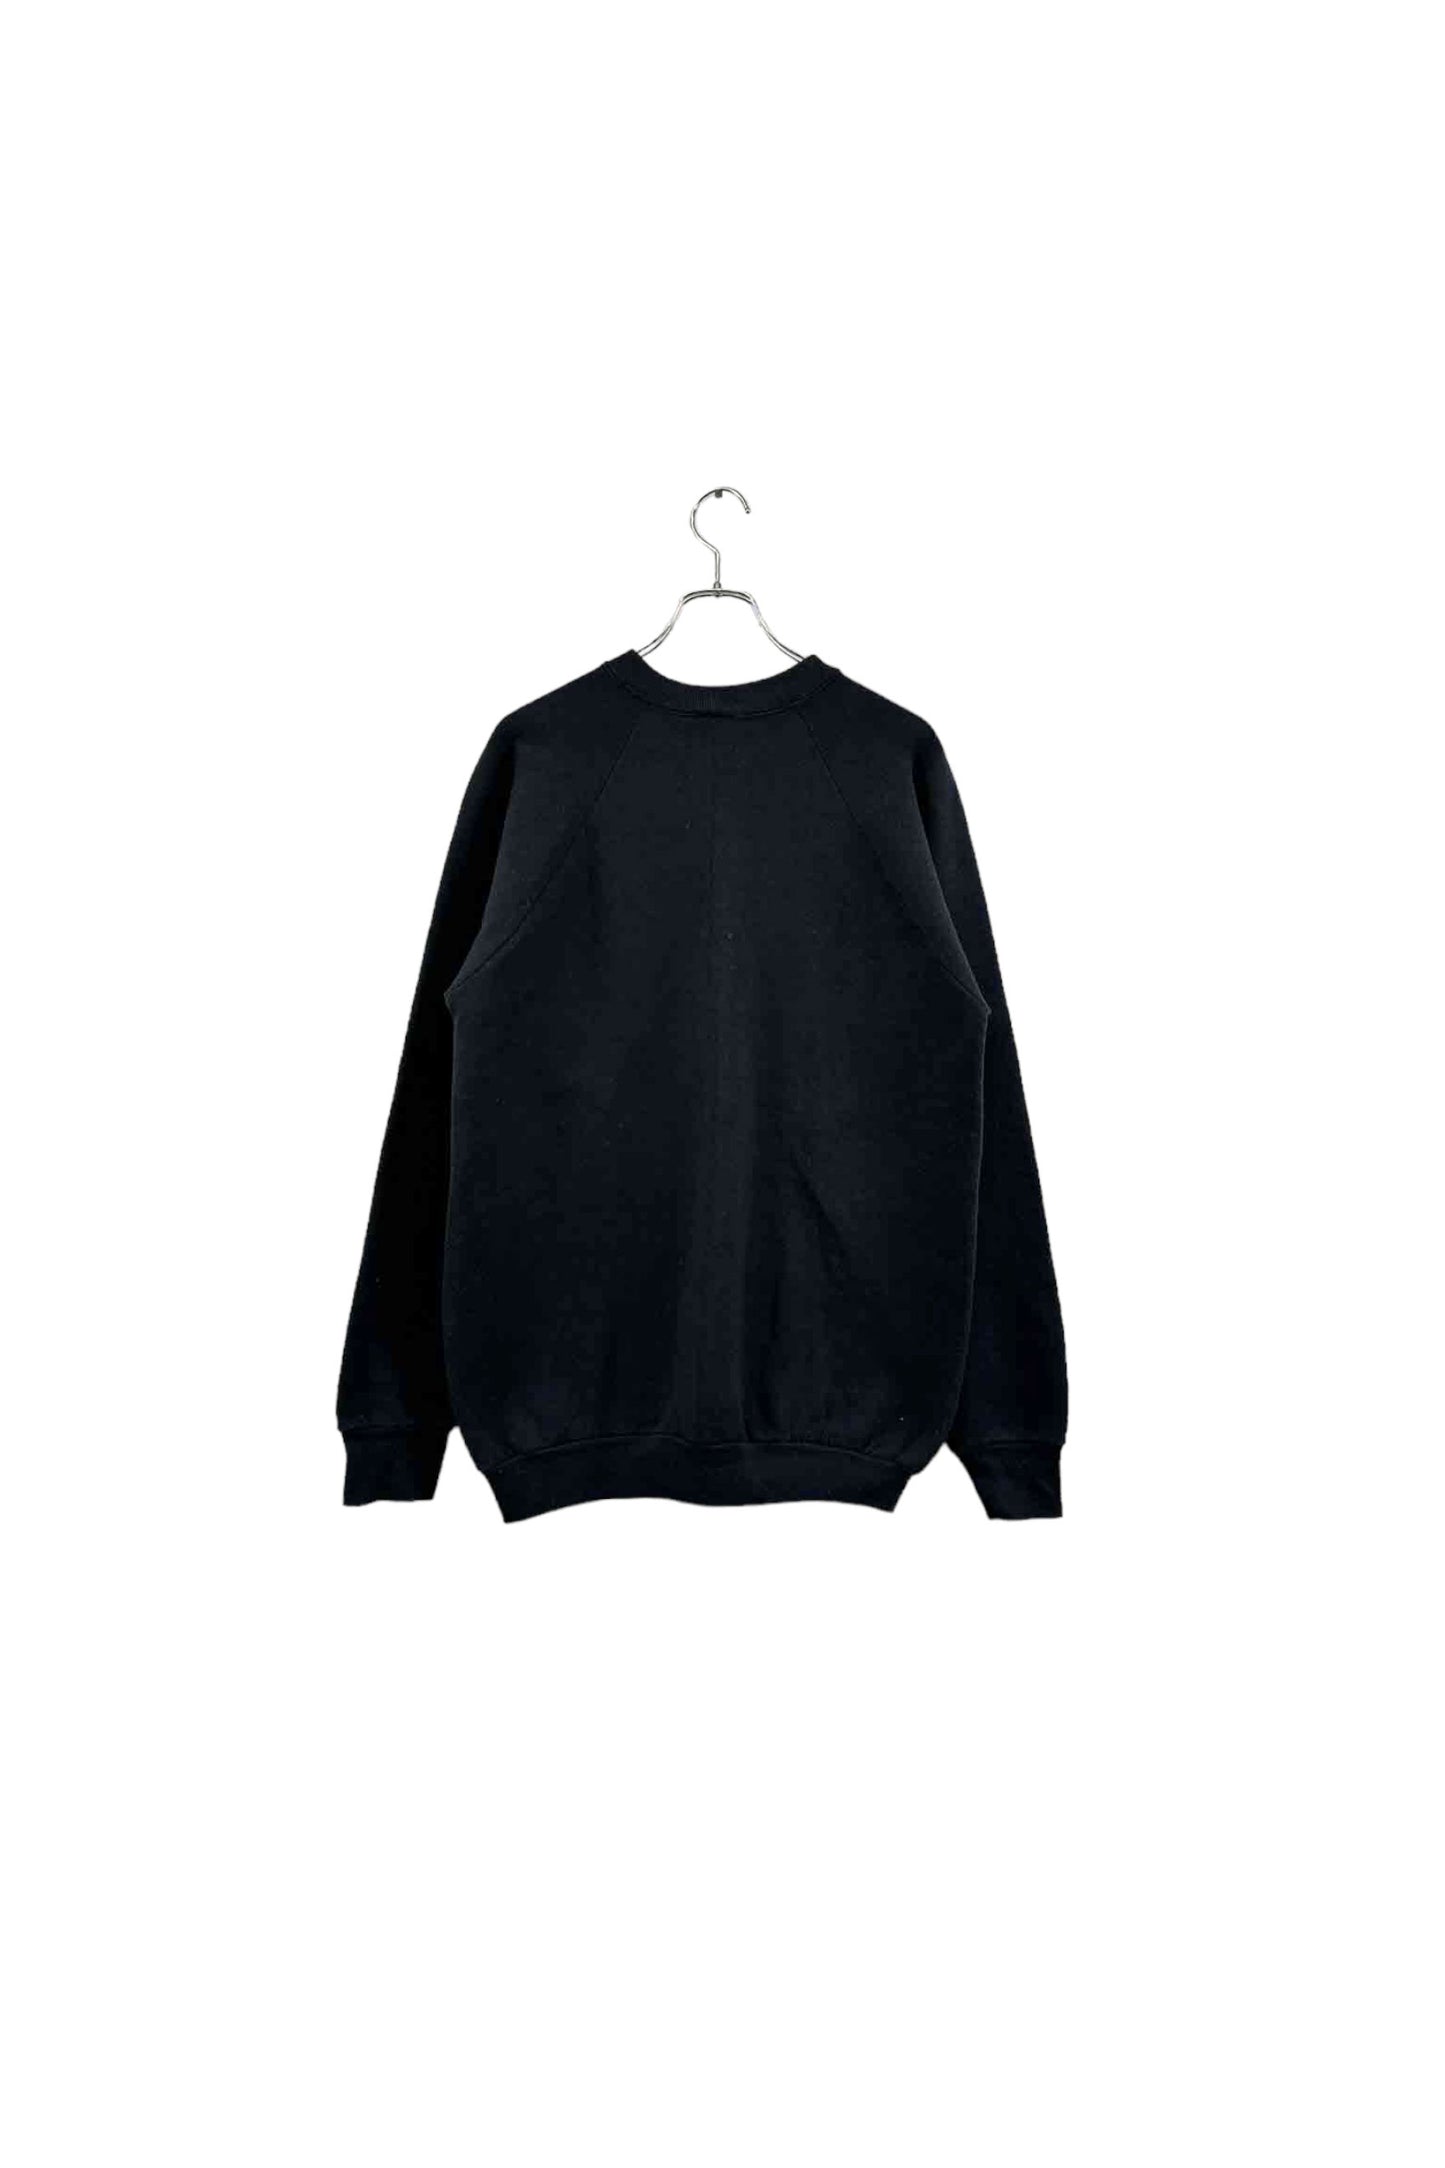 Made in USA FRUIT OF THE LOOM black sweat